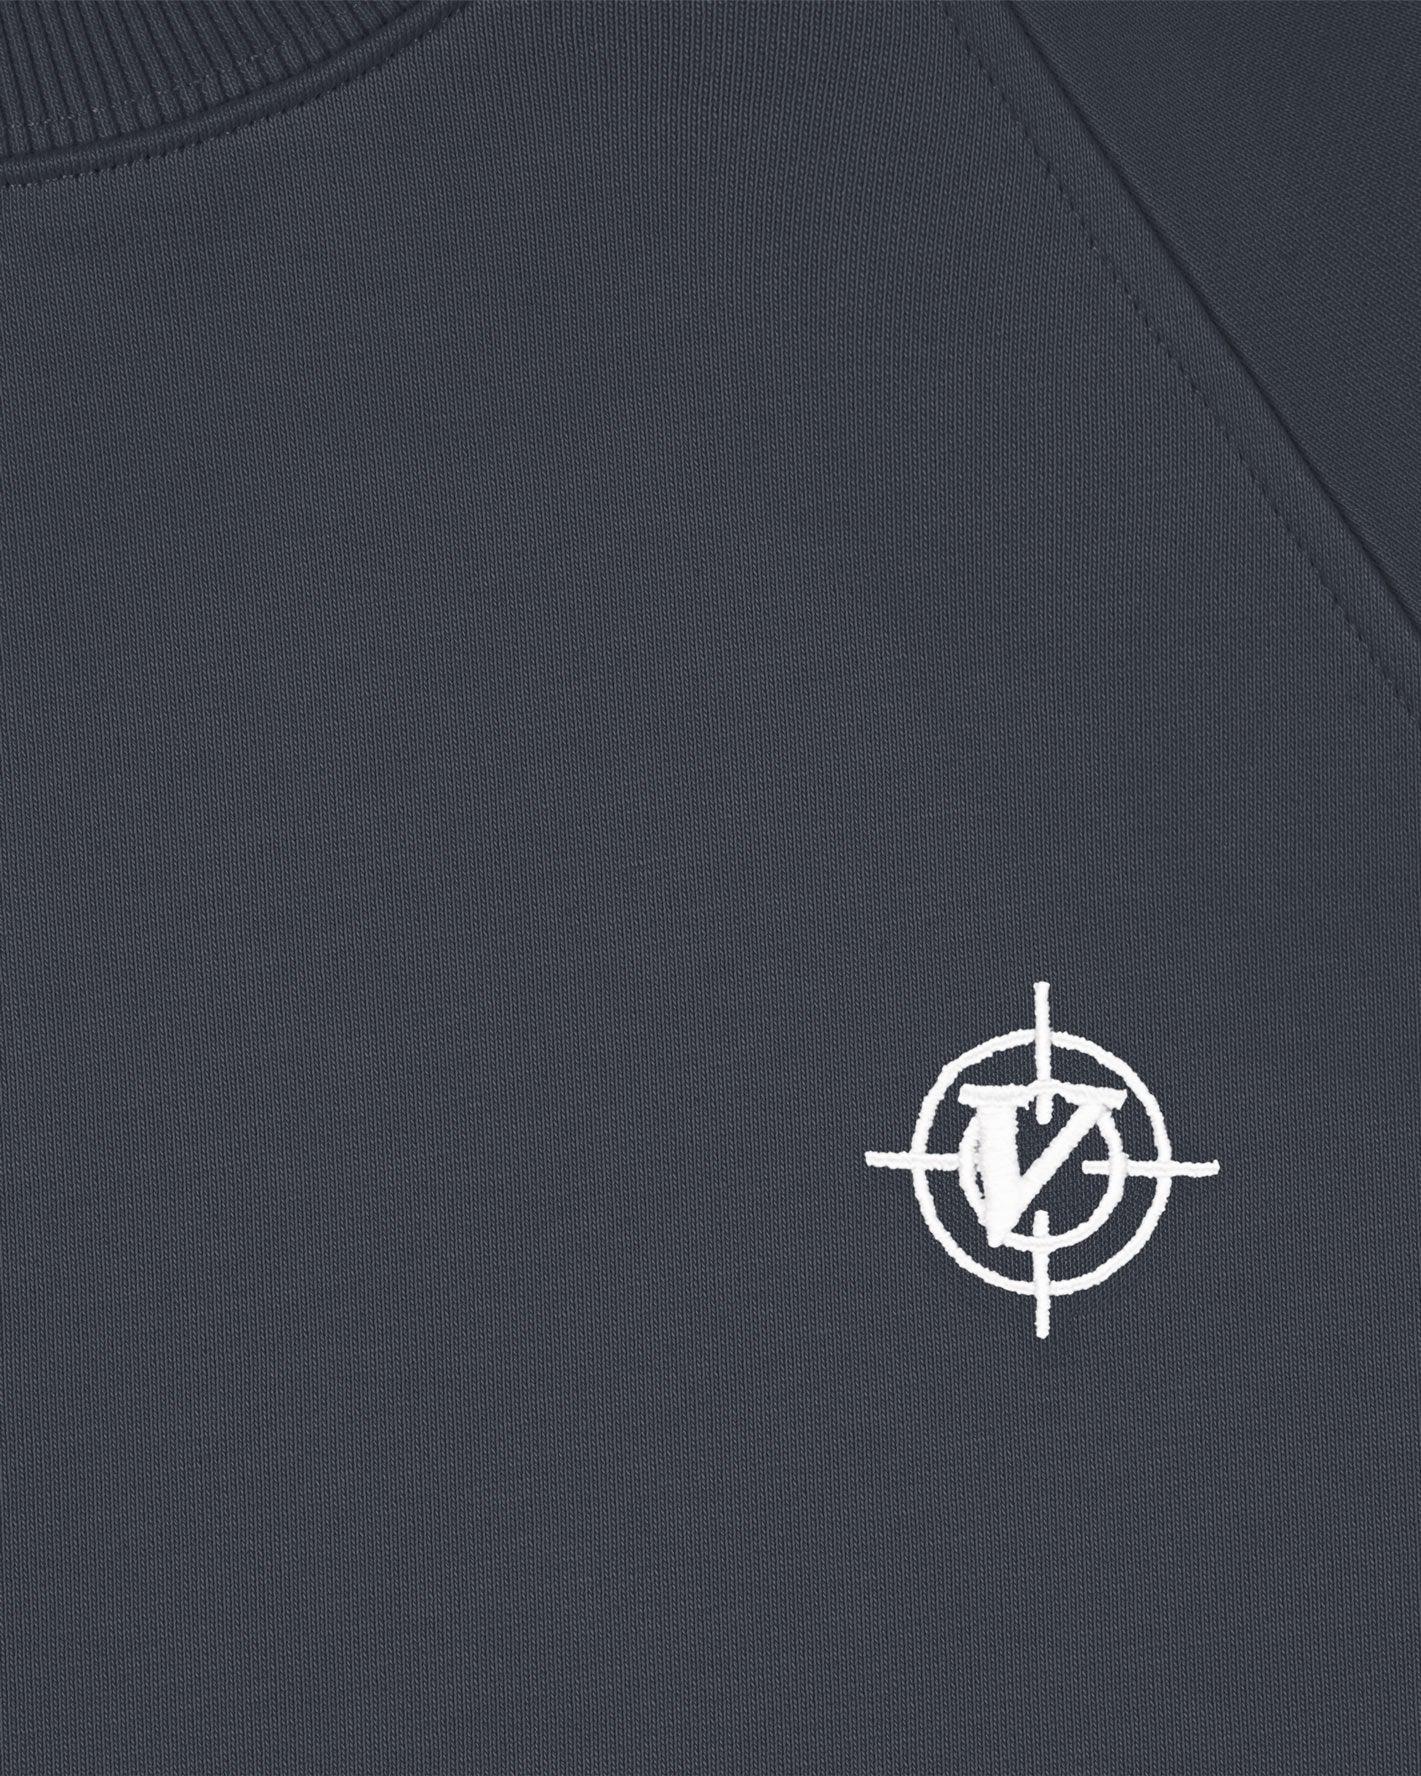 INSIDE OUT HOODIE NAVY - VICINITY